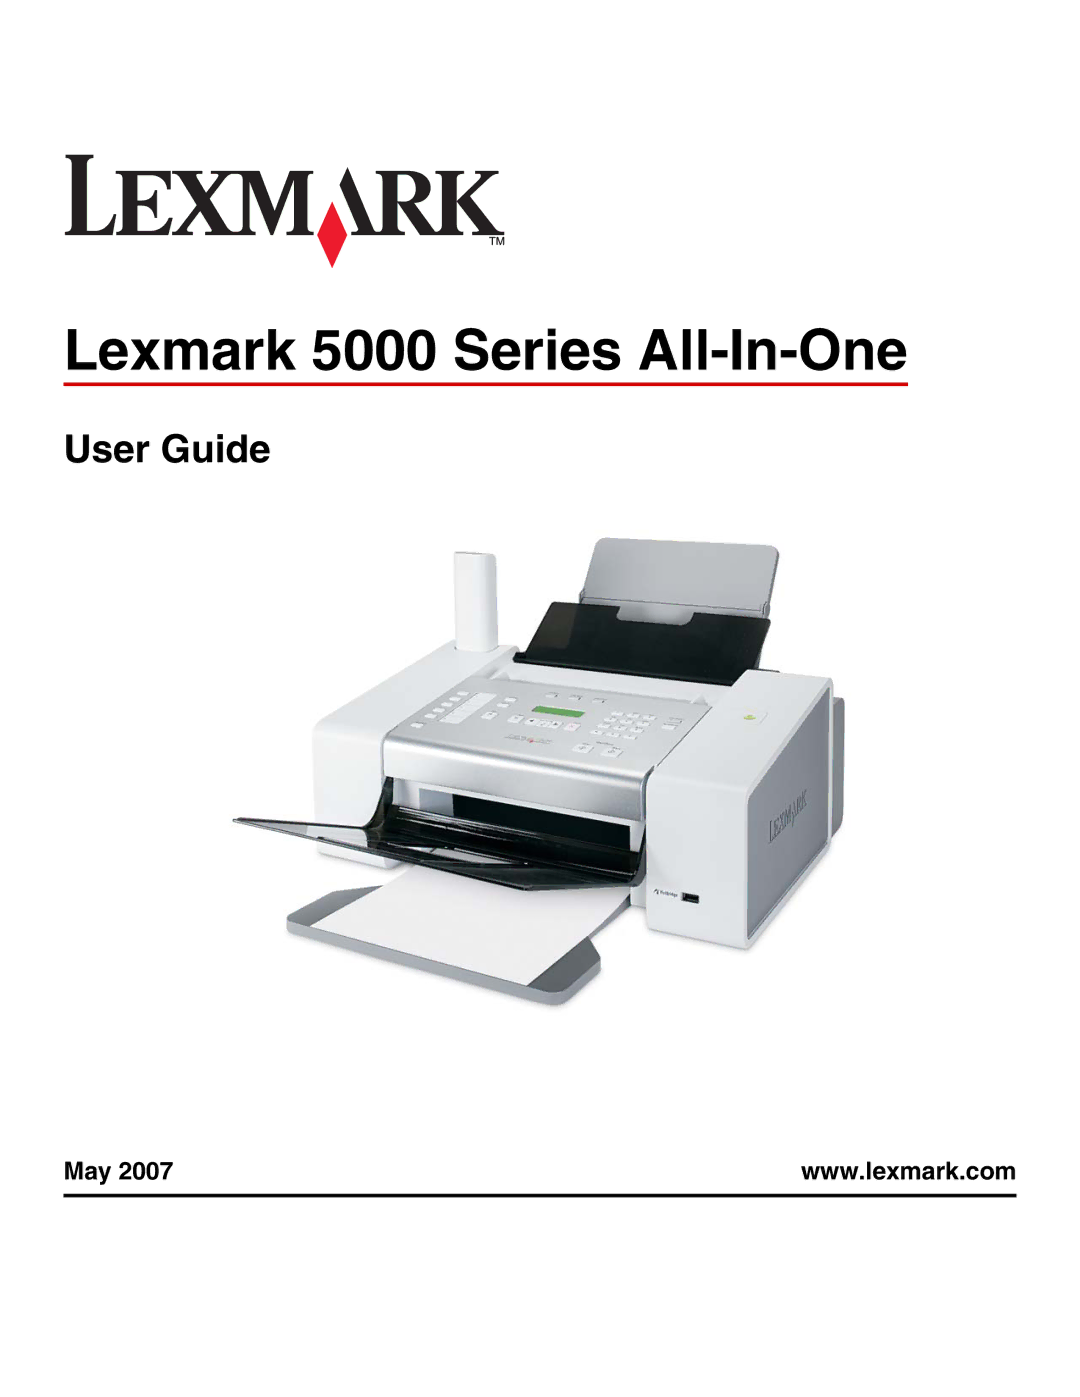 Lexmark manual Lexmark 5000 Series All-In-One, User Guide 